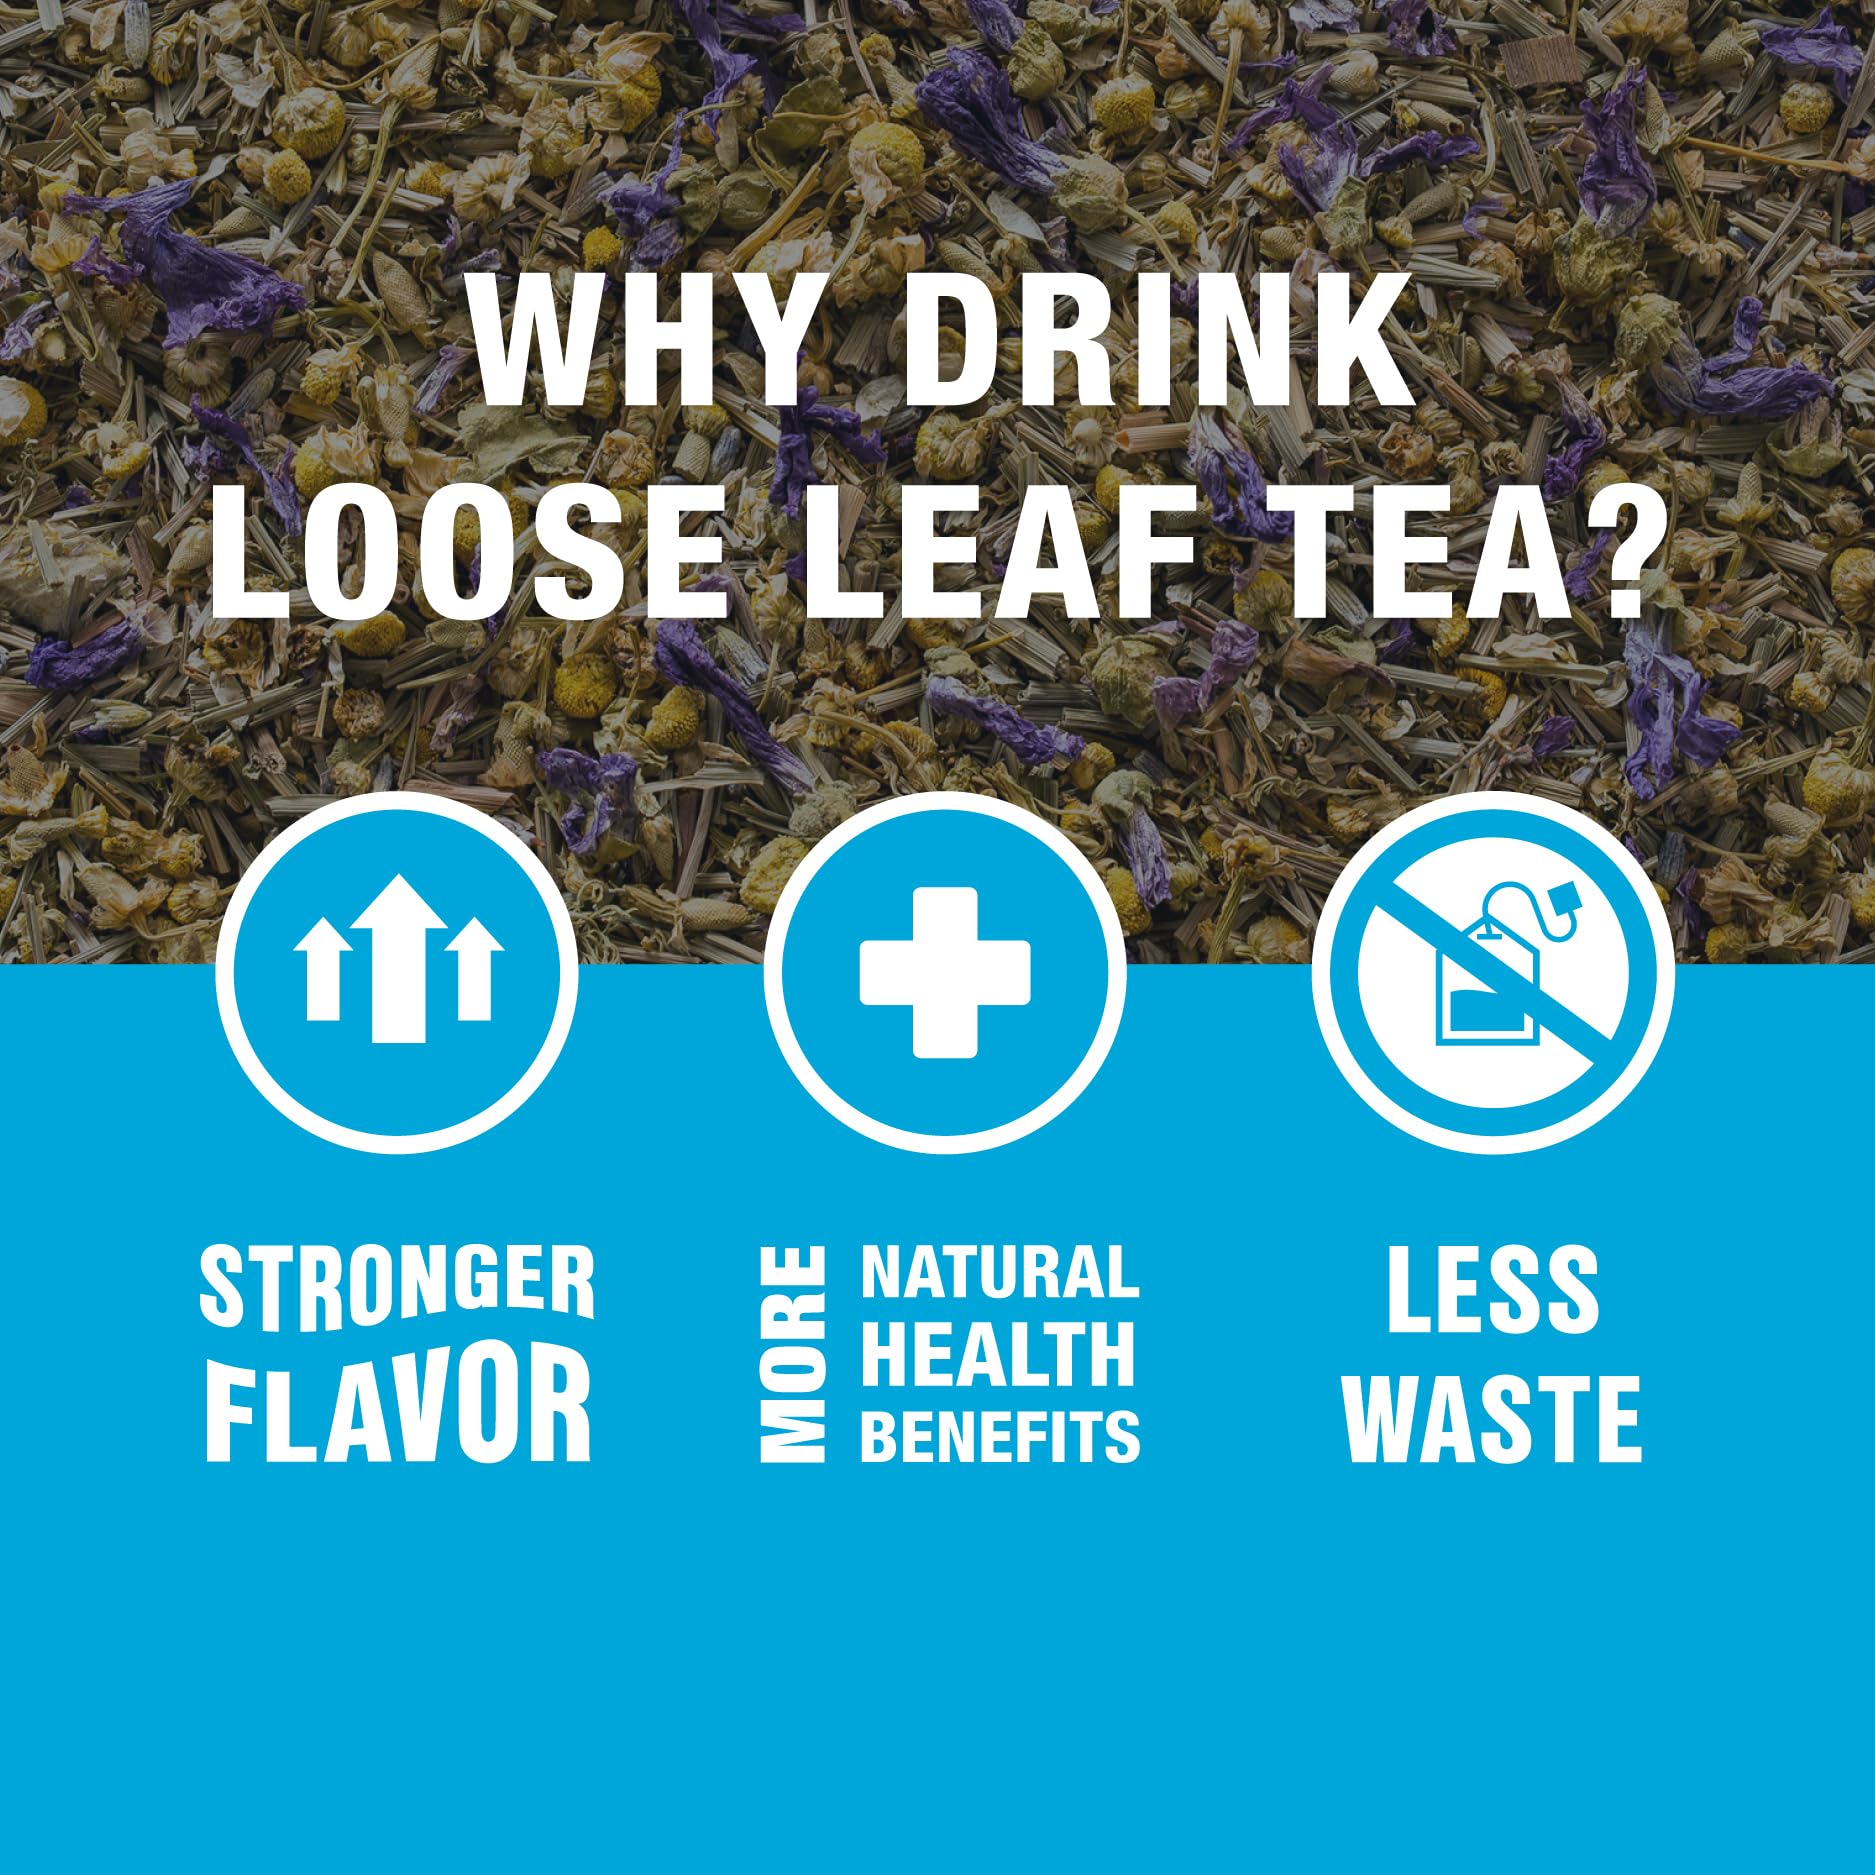 Tiesta Tea - Lavender Chamomile | Soft Chamomile Herbal Tea | Premium Loose Leaf Tea Blend | Non Caffeinated Herbal Tea | Make Hot or Iced Tea & Brews Up to 25 Cups - 0.9 Ounce Resealable Pouch